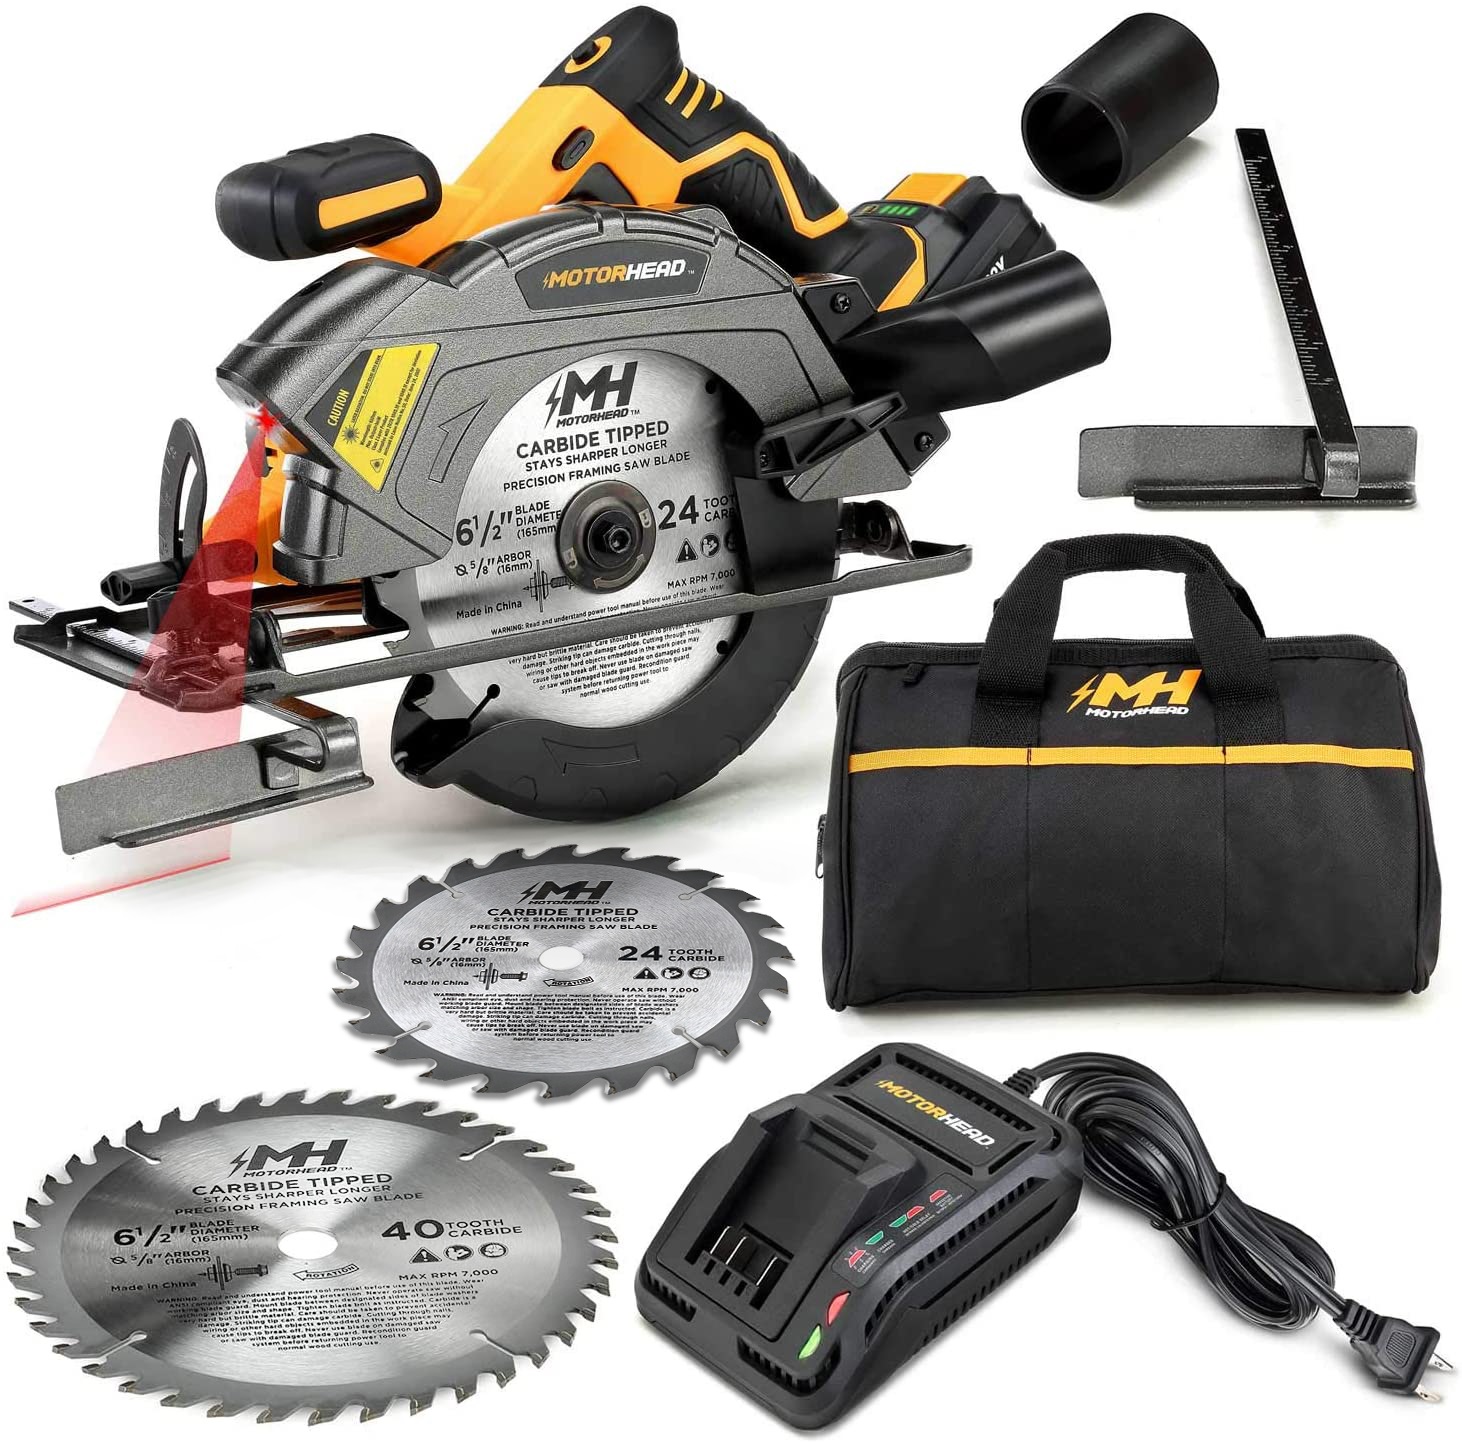 MOTORHEAD 20V ULTRA 6-1/2” Cordless Circular Saw, Lithium-Ion, Laser Guide, LED, Rip Fence, 0-50° Bevel, w/ 2Ah Battery & Quick Charger, Bag, 2 Blades - 24T, 40T, $69.99